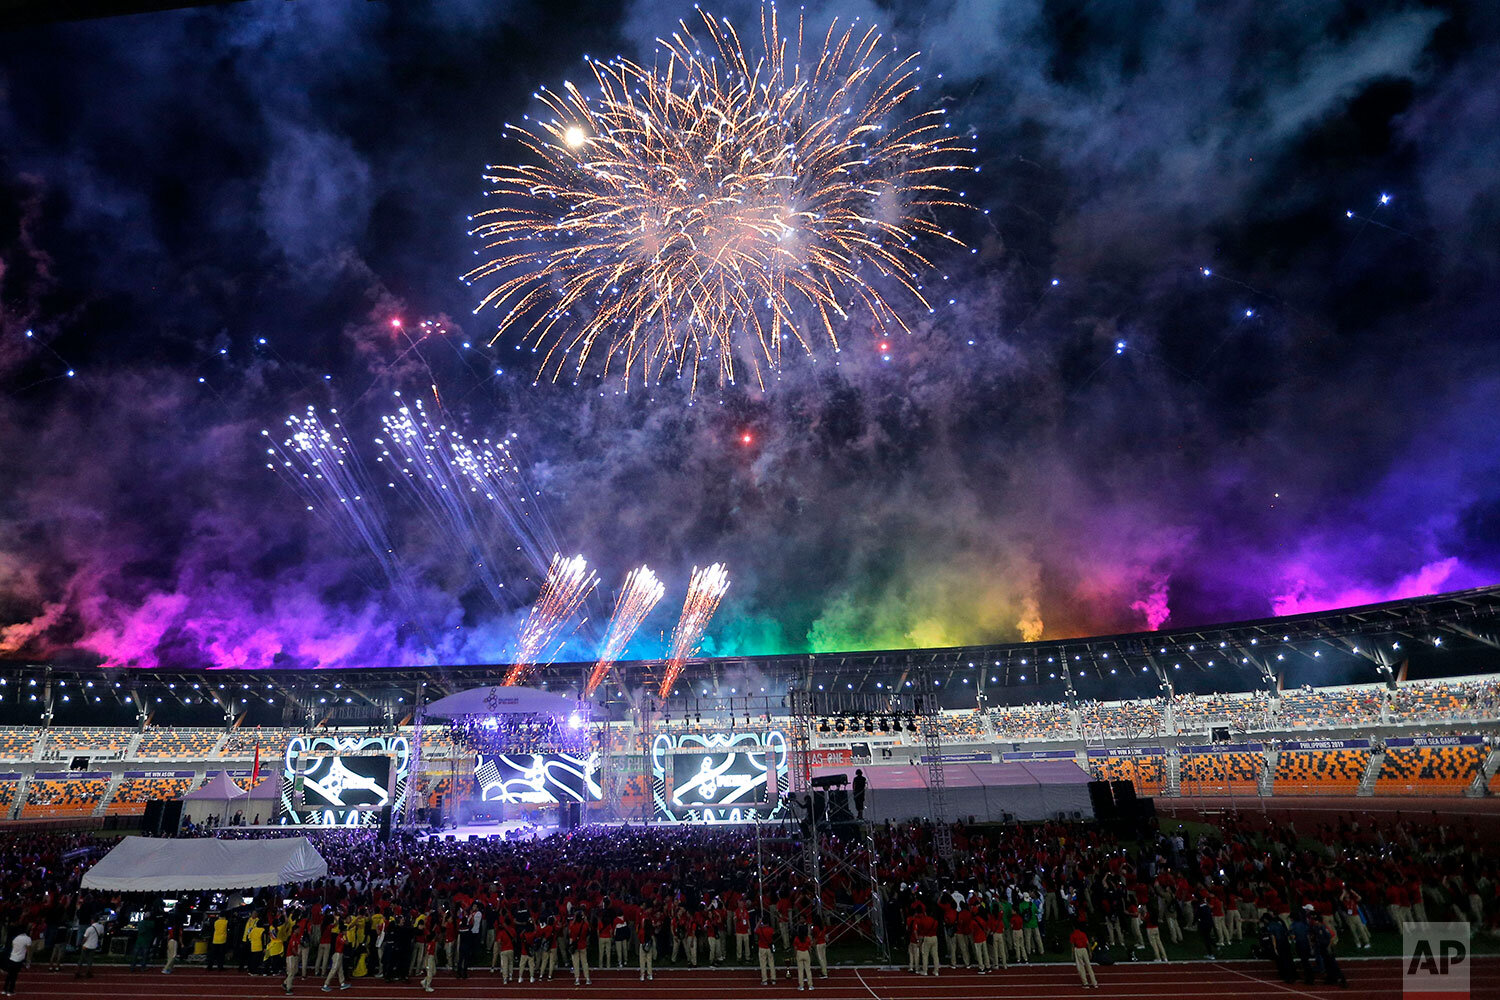  Athletes and spectators watch during a fireworks display at the closing ceremony of the 30th South East Asian Games at New Clark City, Tarlac province, northern Philippines on Wednesday Dec. 11, 2019. Vietnam will host the next SEA Games on 2021. (A